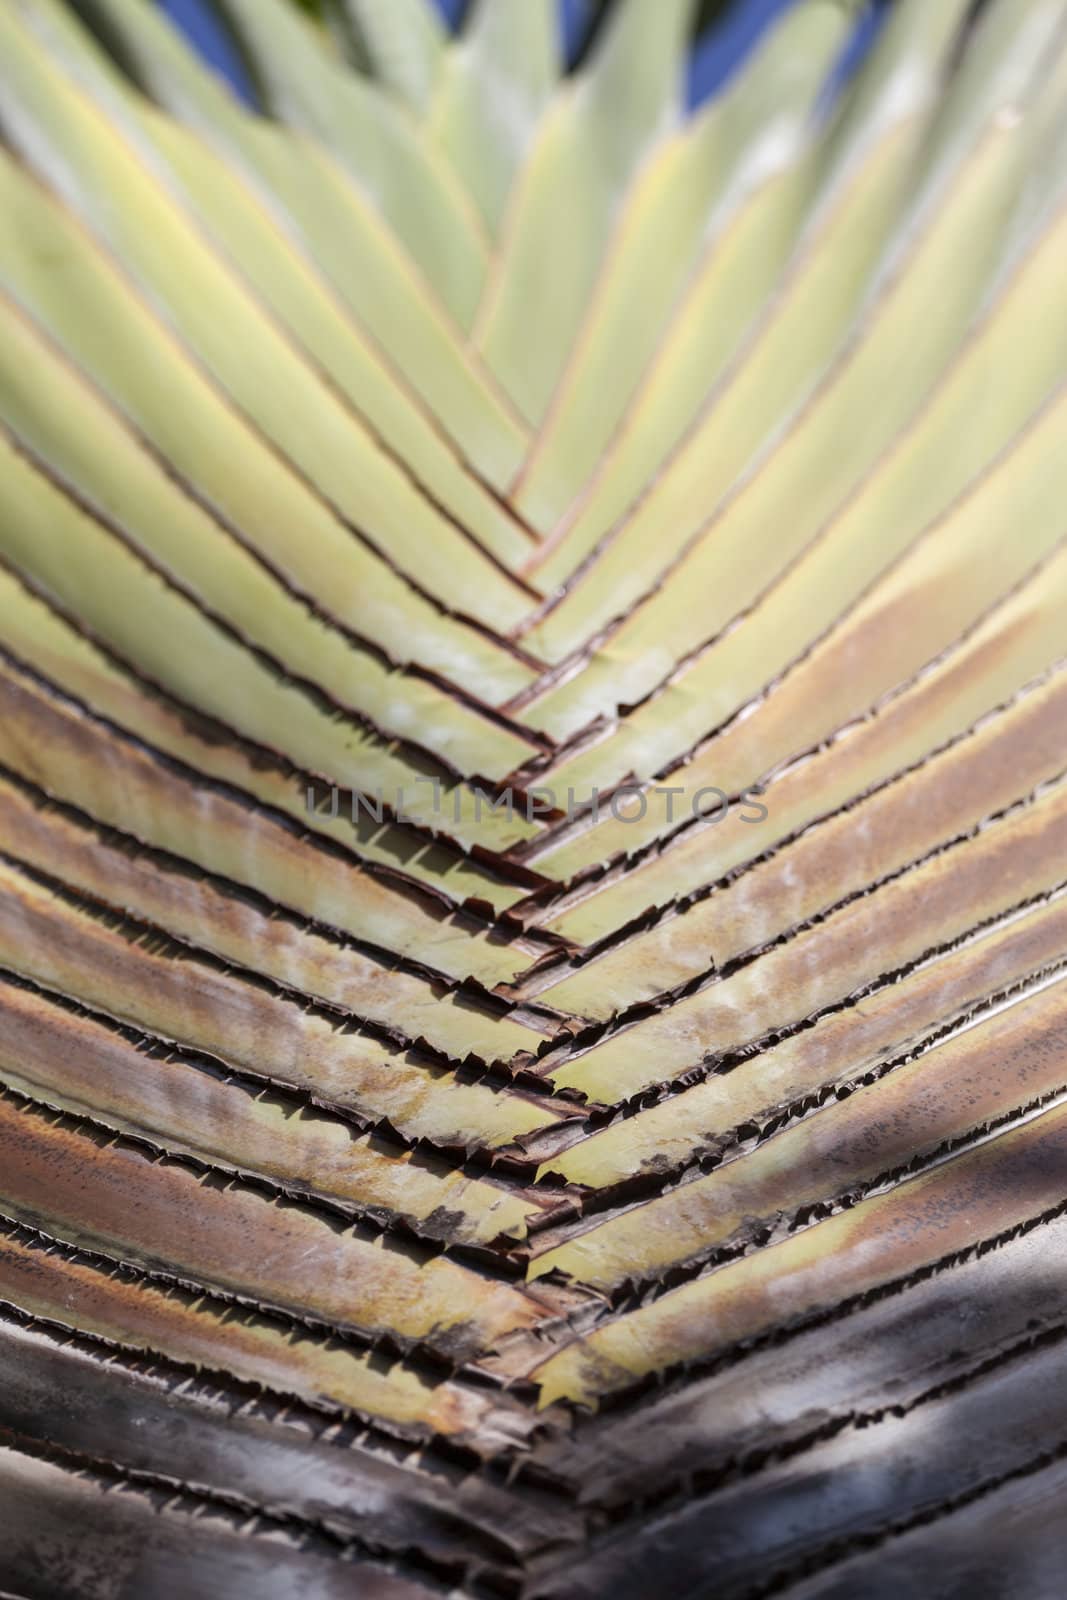 Close up look at a palm tree leaf